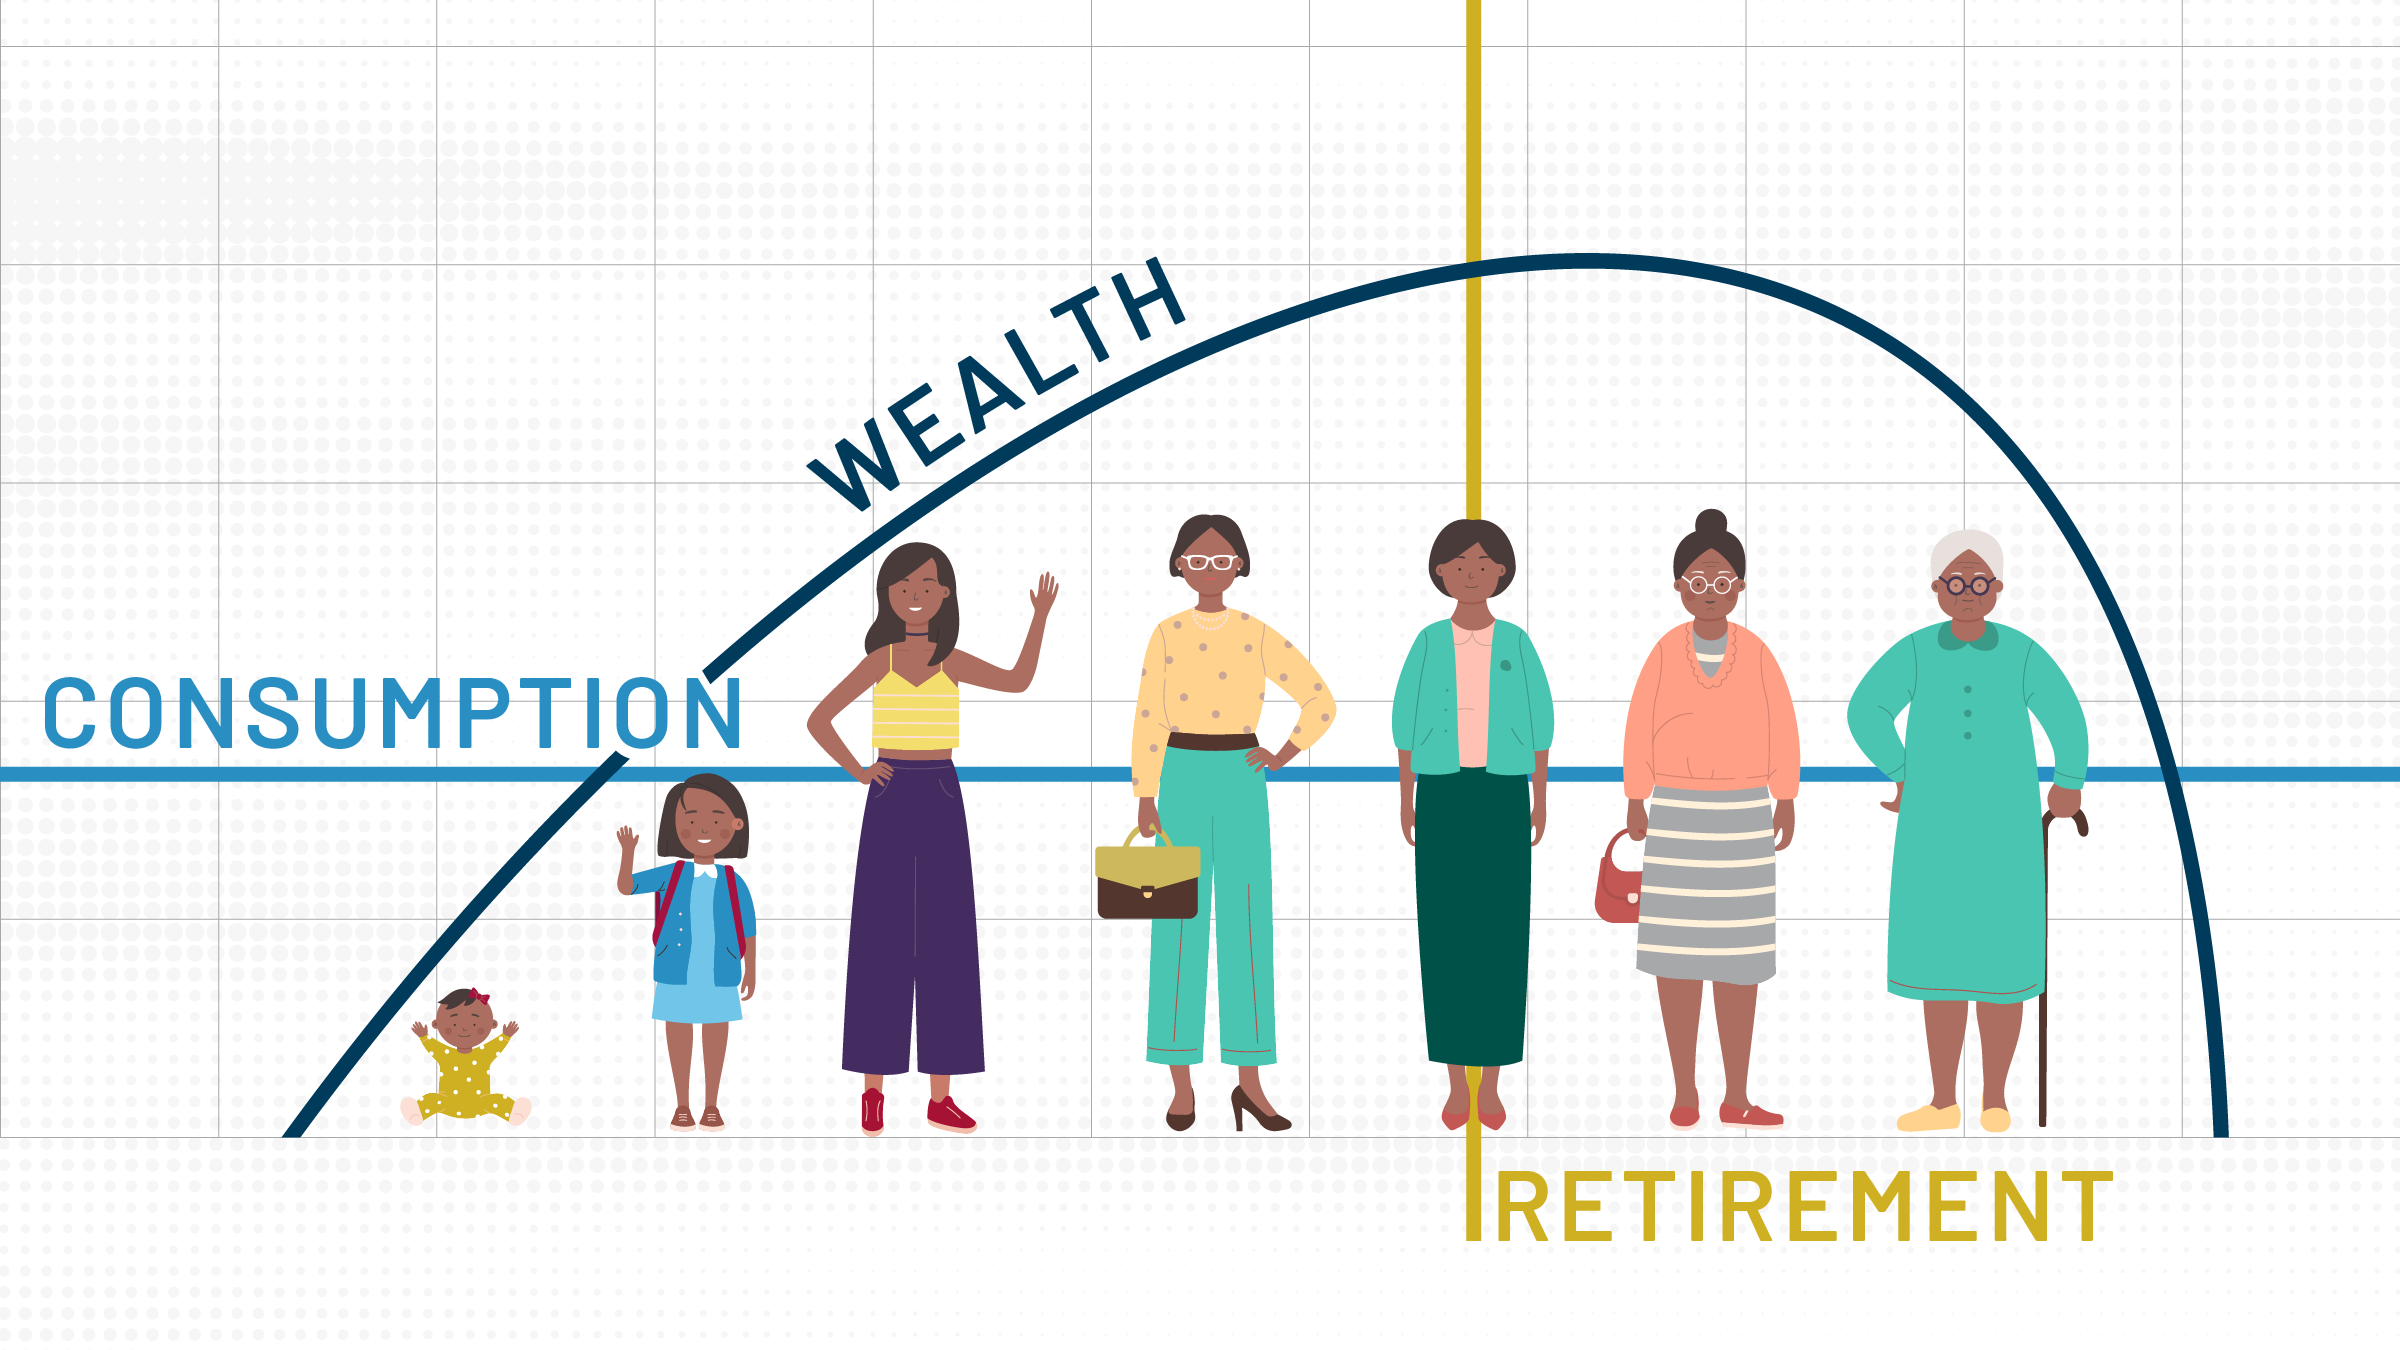 Graphic chart depicting the relationships of consumption and wealth as a person ages